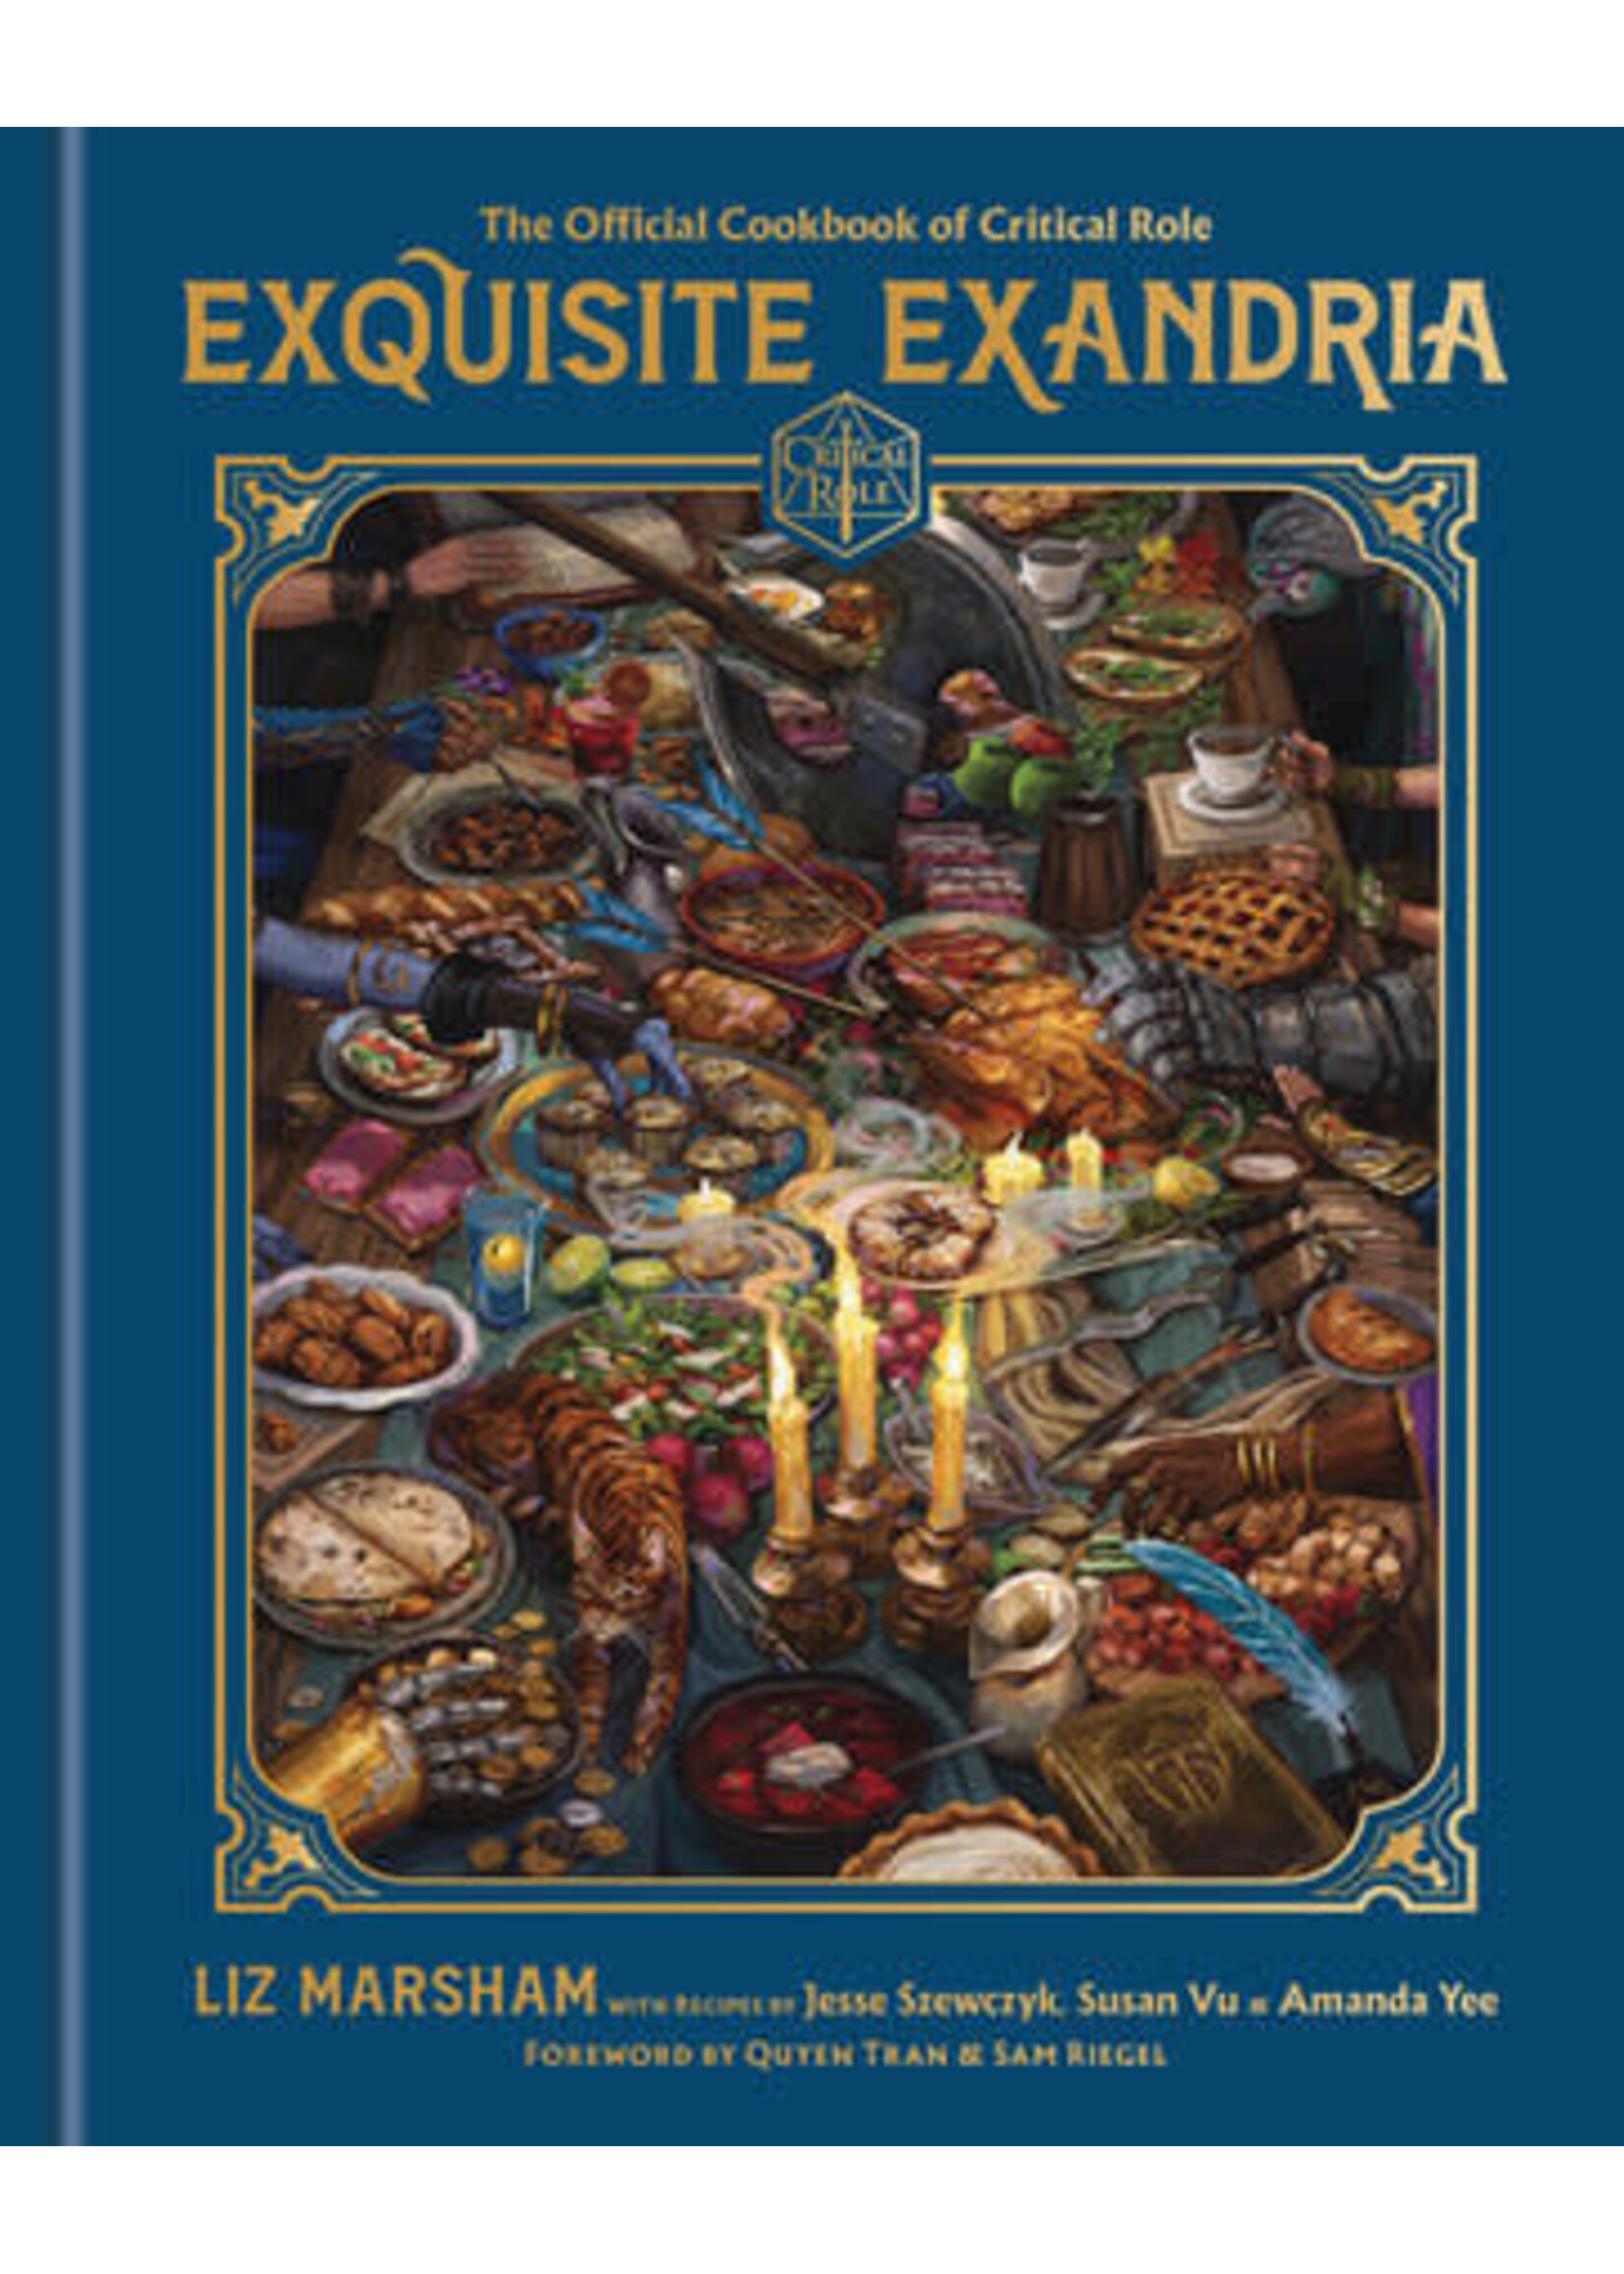 RANDOM HOUSE WORLDS EXQUISITE EXANDRIA THE OFFICIAL COOKBOOK OF CR HC